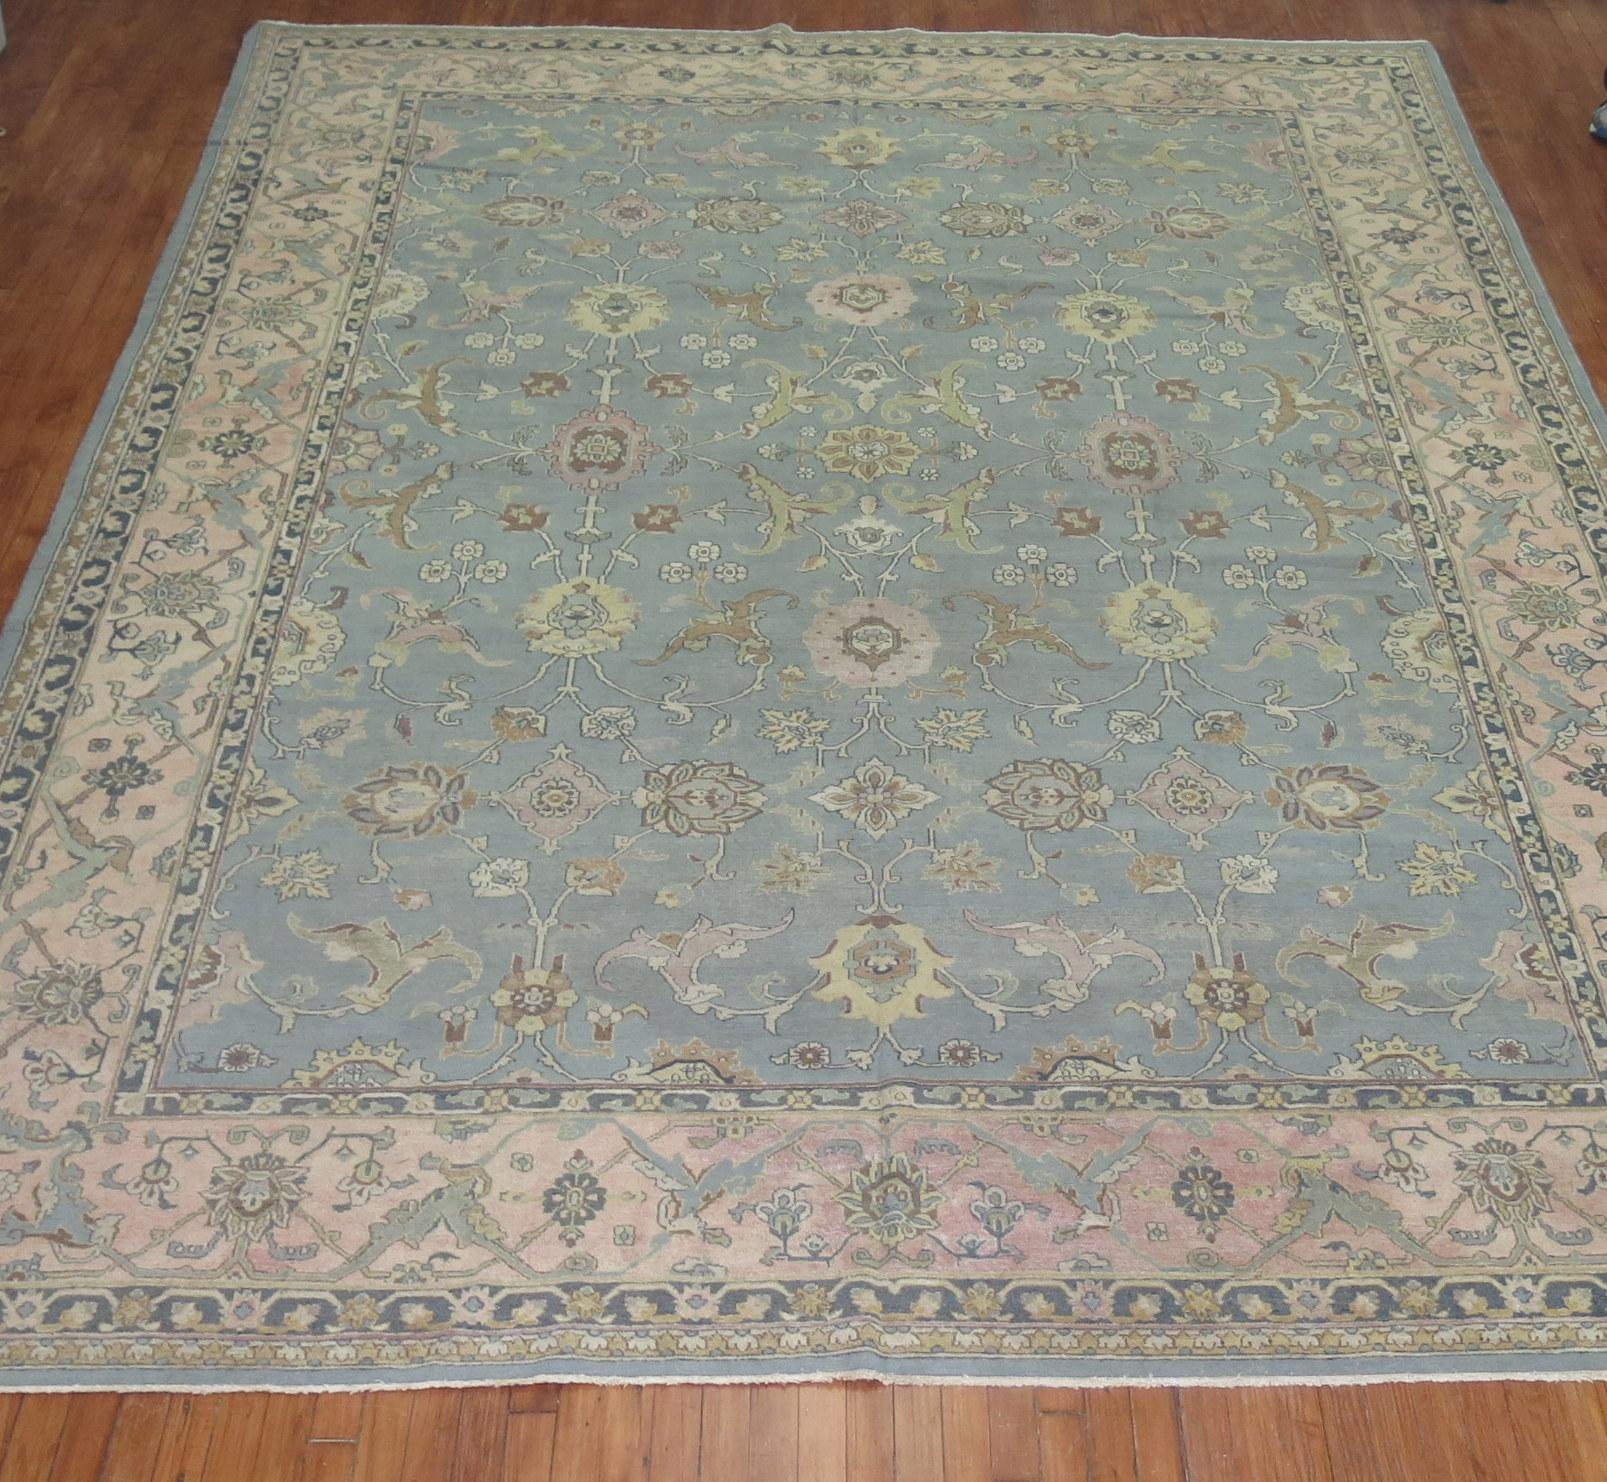 High decorative room size 2nd quarter of the 20th century antique Indo Tabriz rug from the early 20th century. Gray-blue field, accents in gray, ivory, and brown surrounded by a soft pink border

 Measures: 9'6'' x13 '6